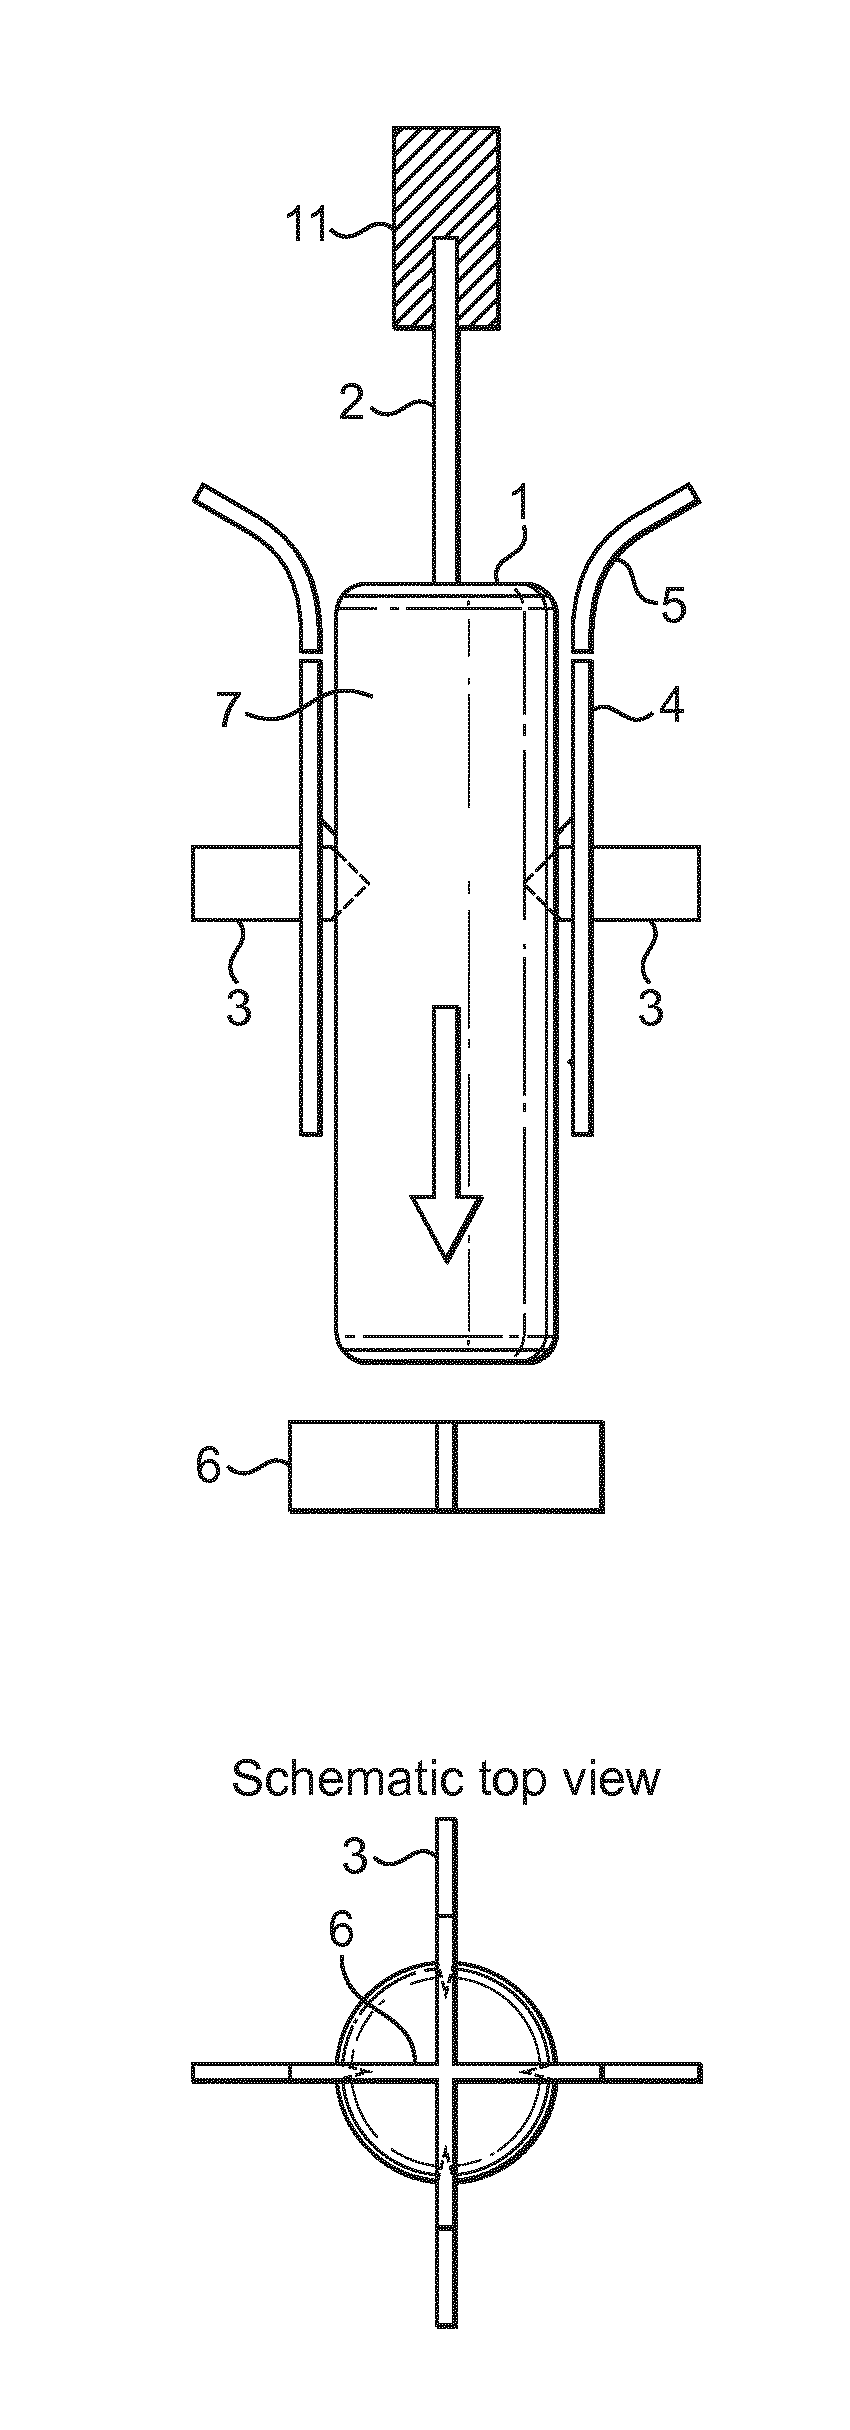 Assembly and method for cutting or embossing coatings